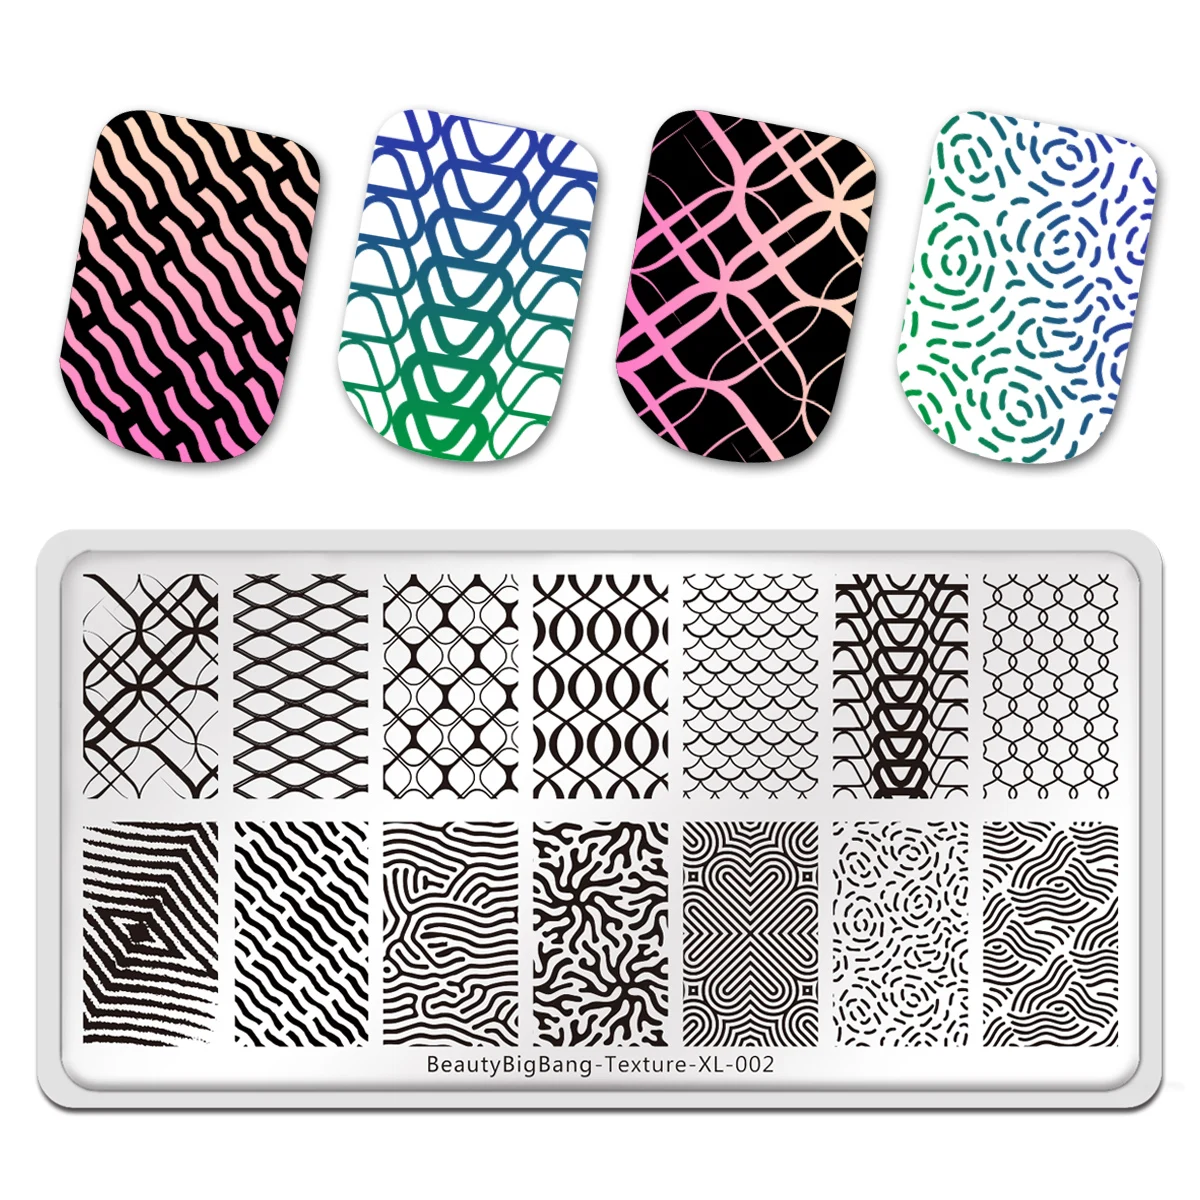 

BeautyBigBang Geometry Nail Stamping Plates New Animals Bear Character Design Fairy Tales Nail Art Stamps Texture XL-002